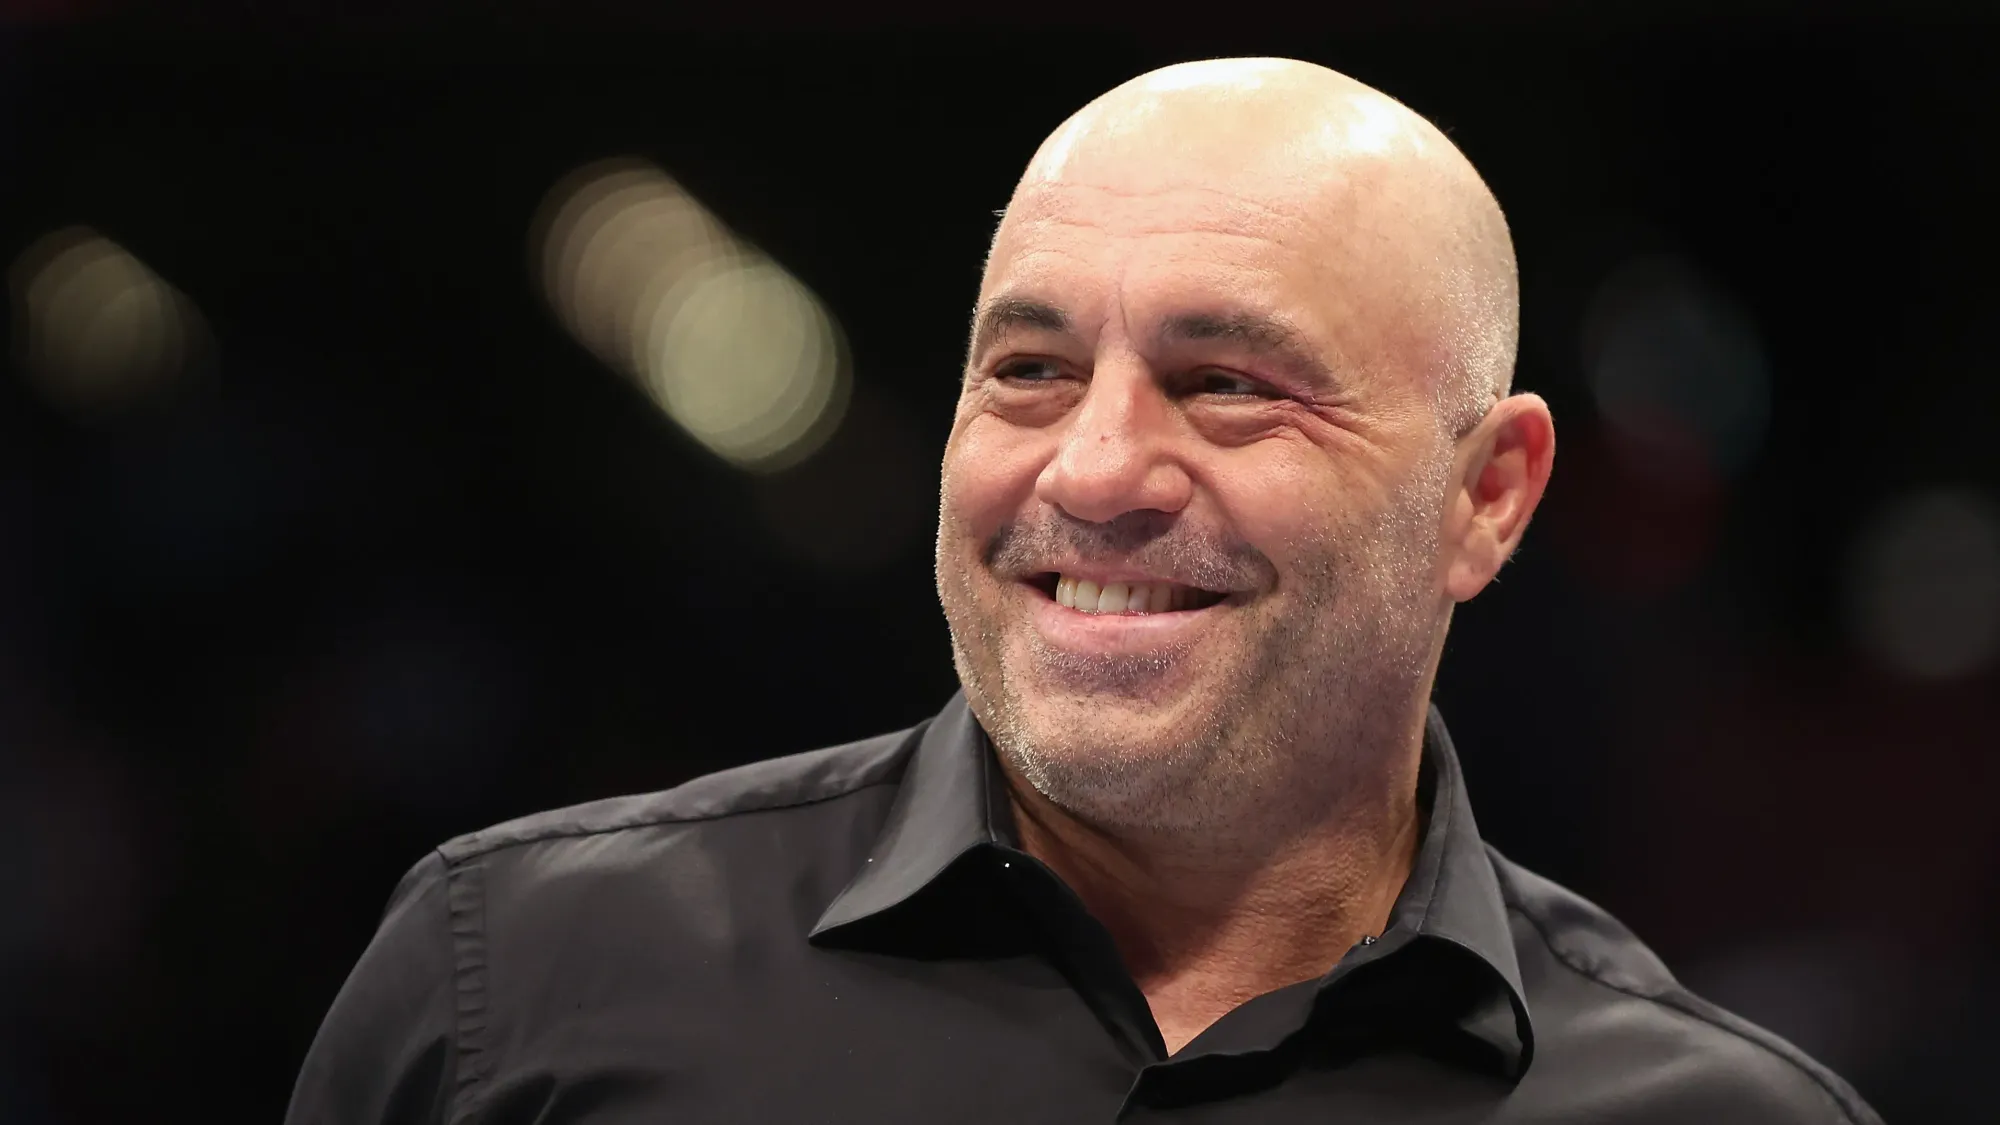 Joe Rogan's latest episode will decrease the use of therapy, bigly.